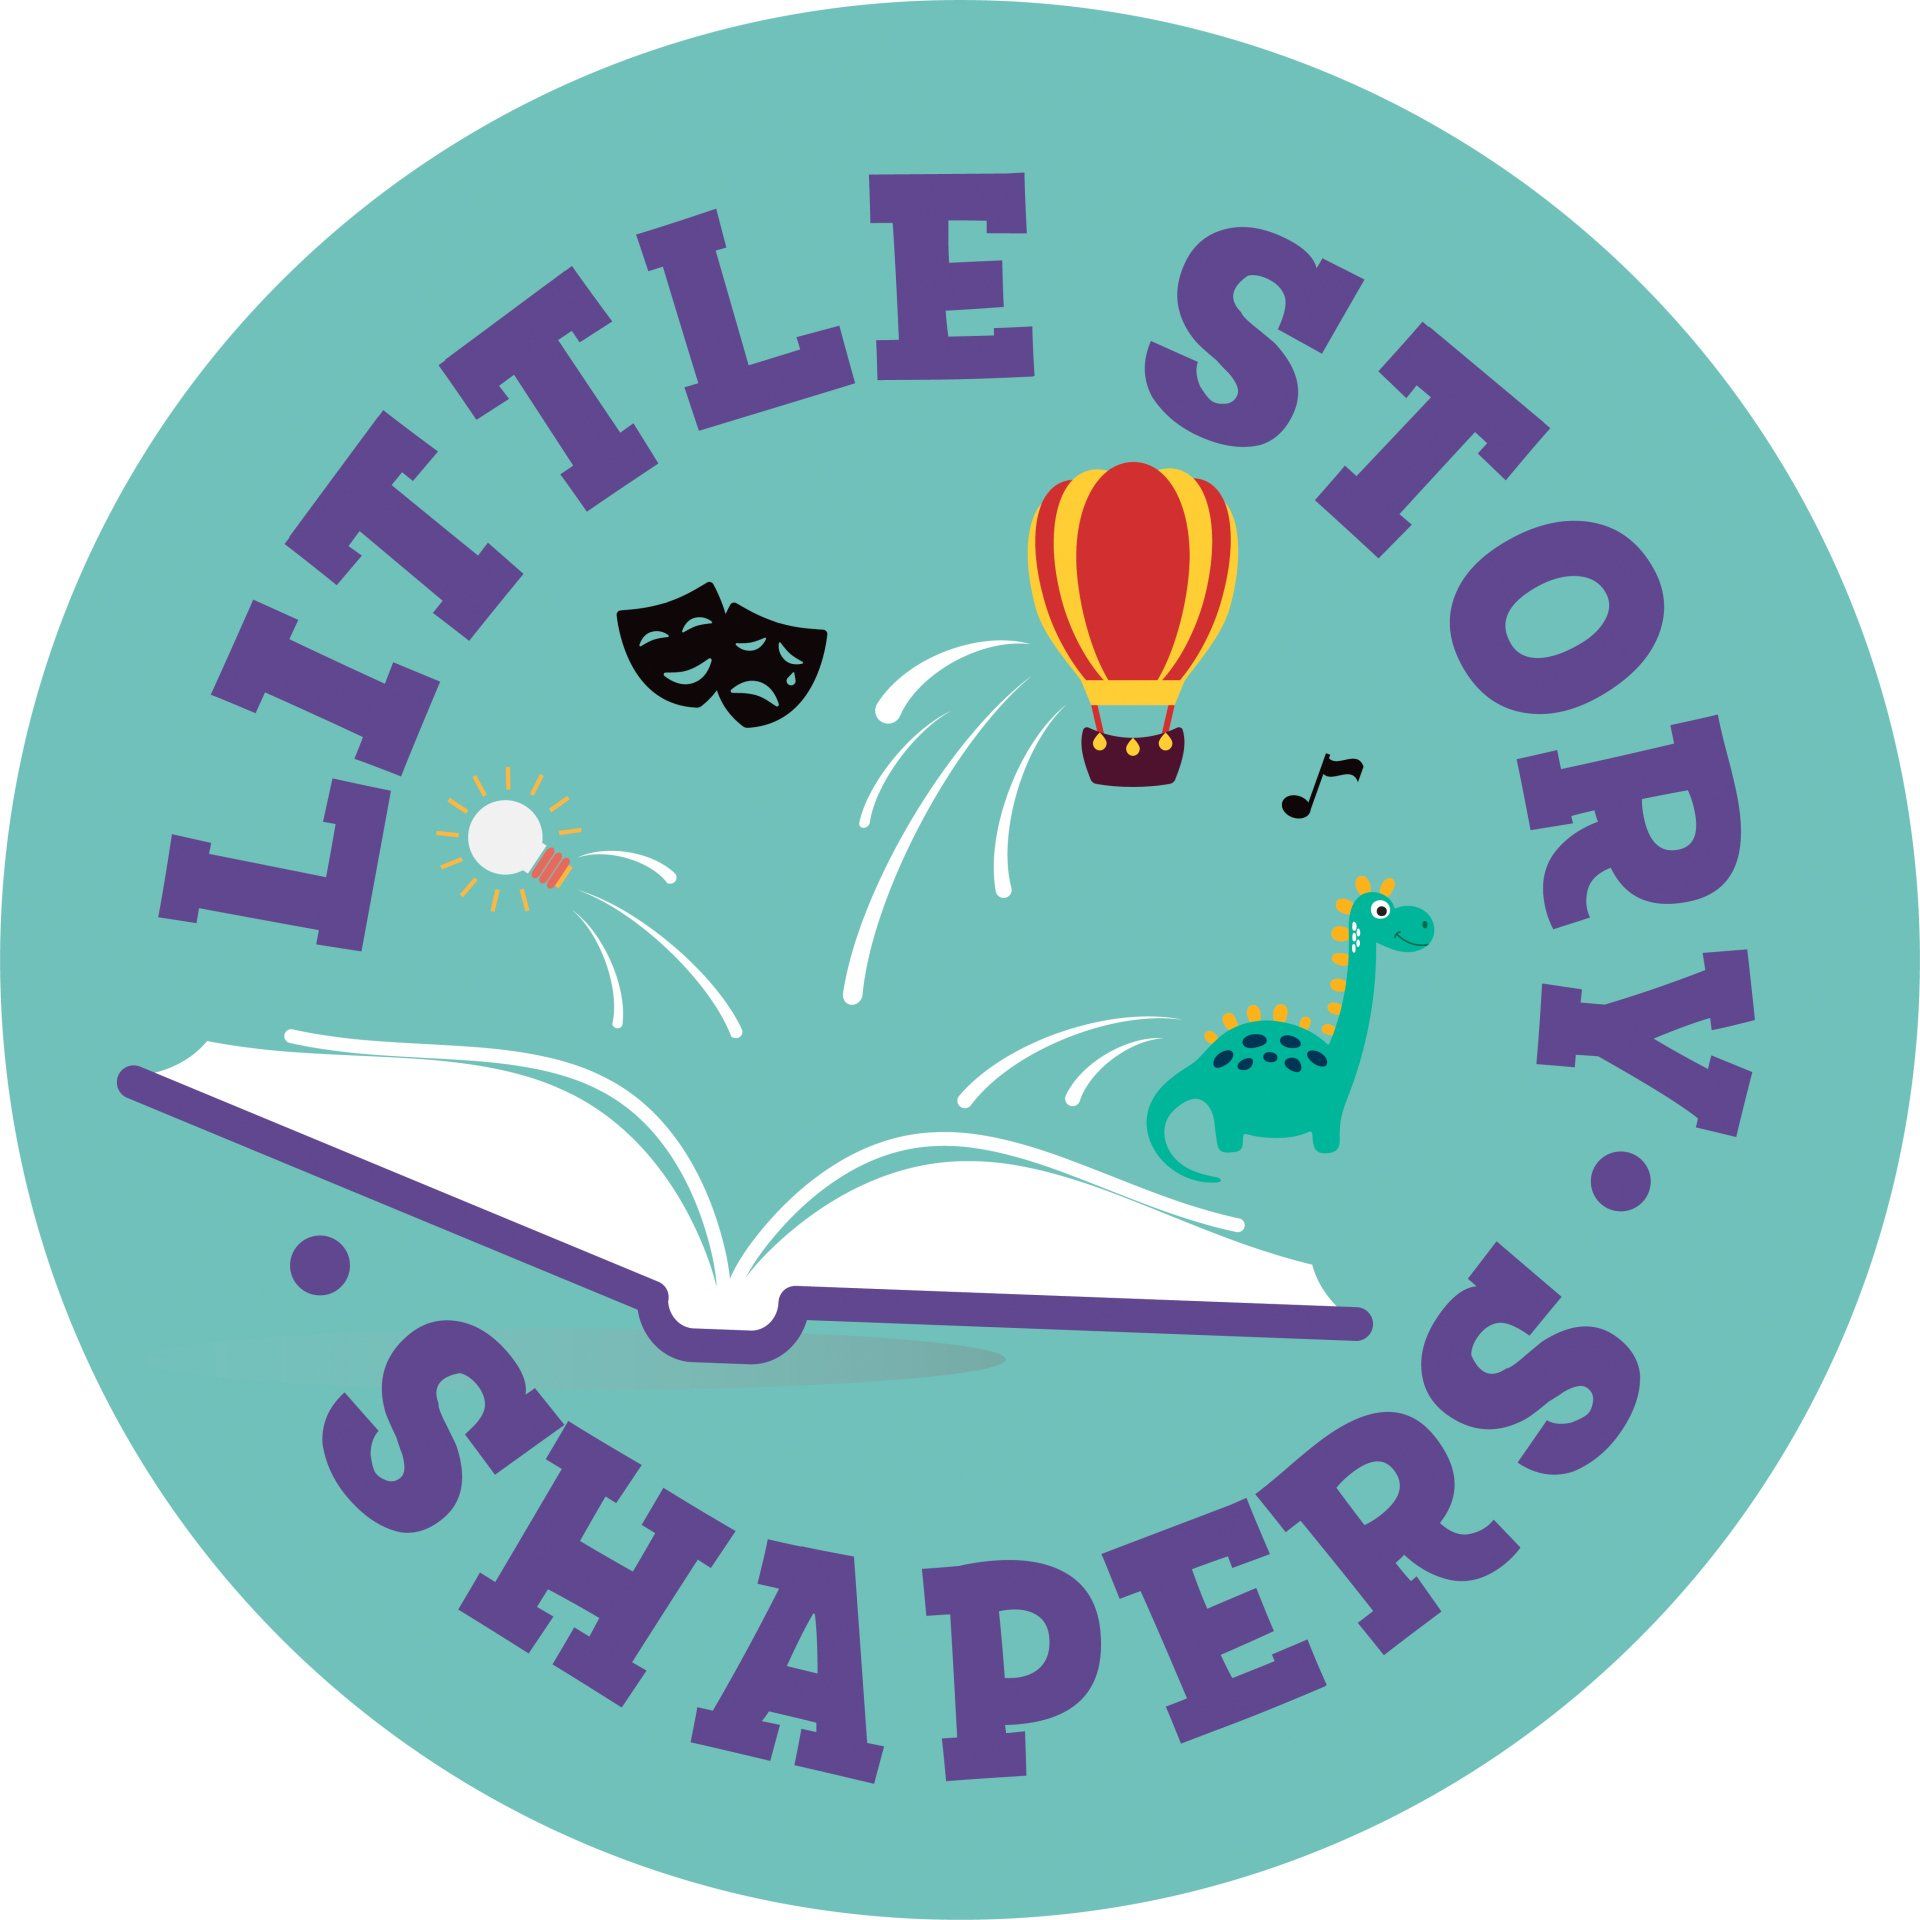 interactive sensory storytelling and drama class for babies, toddlers and preschoolers in Essex